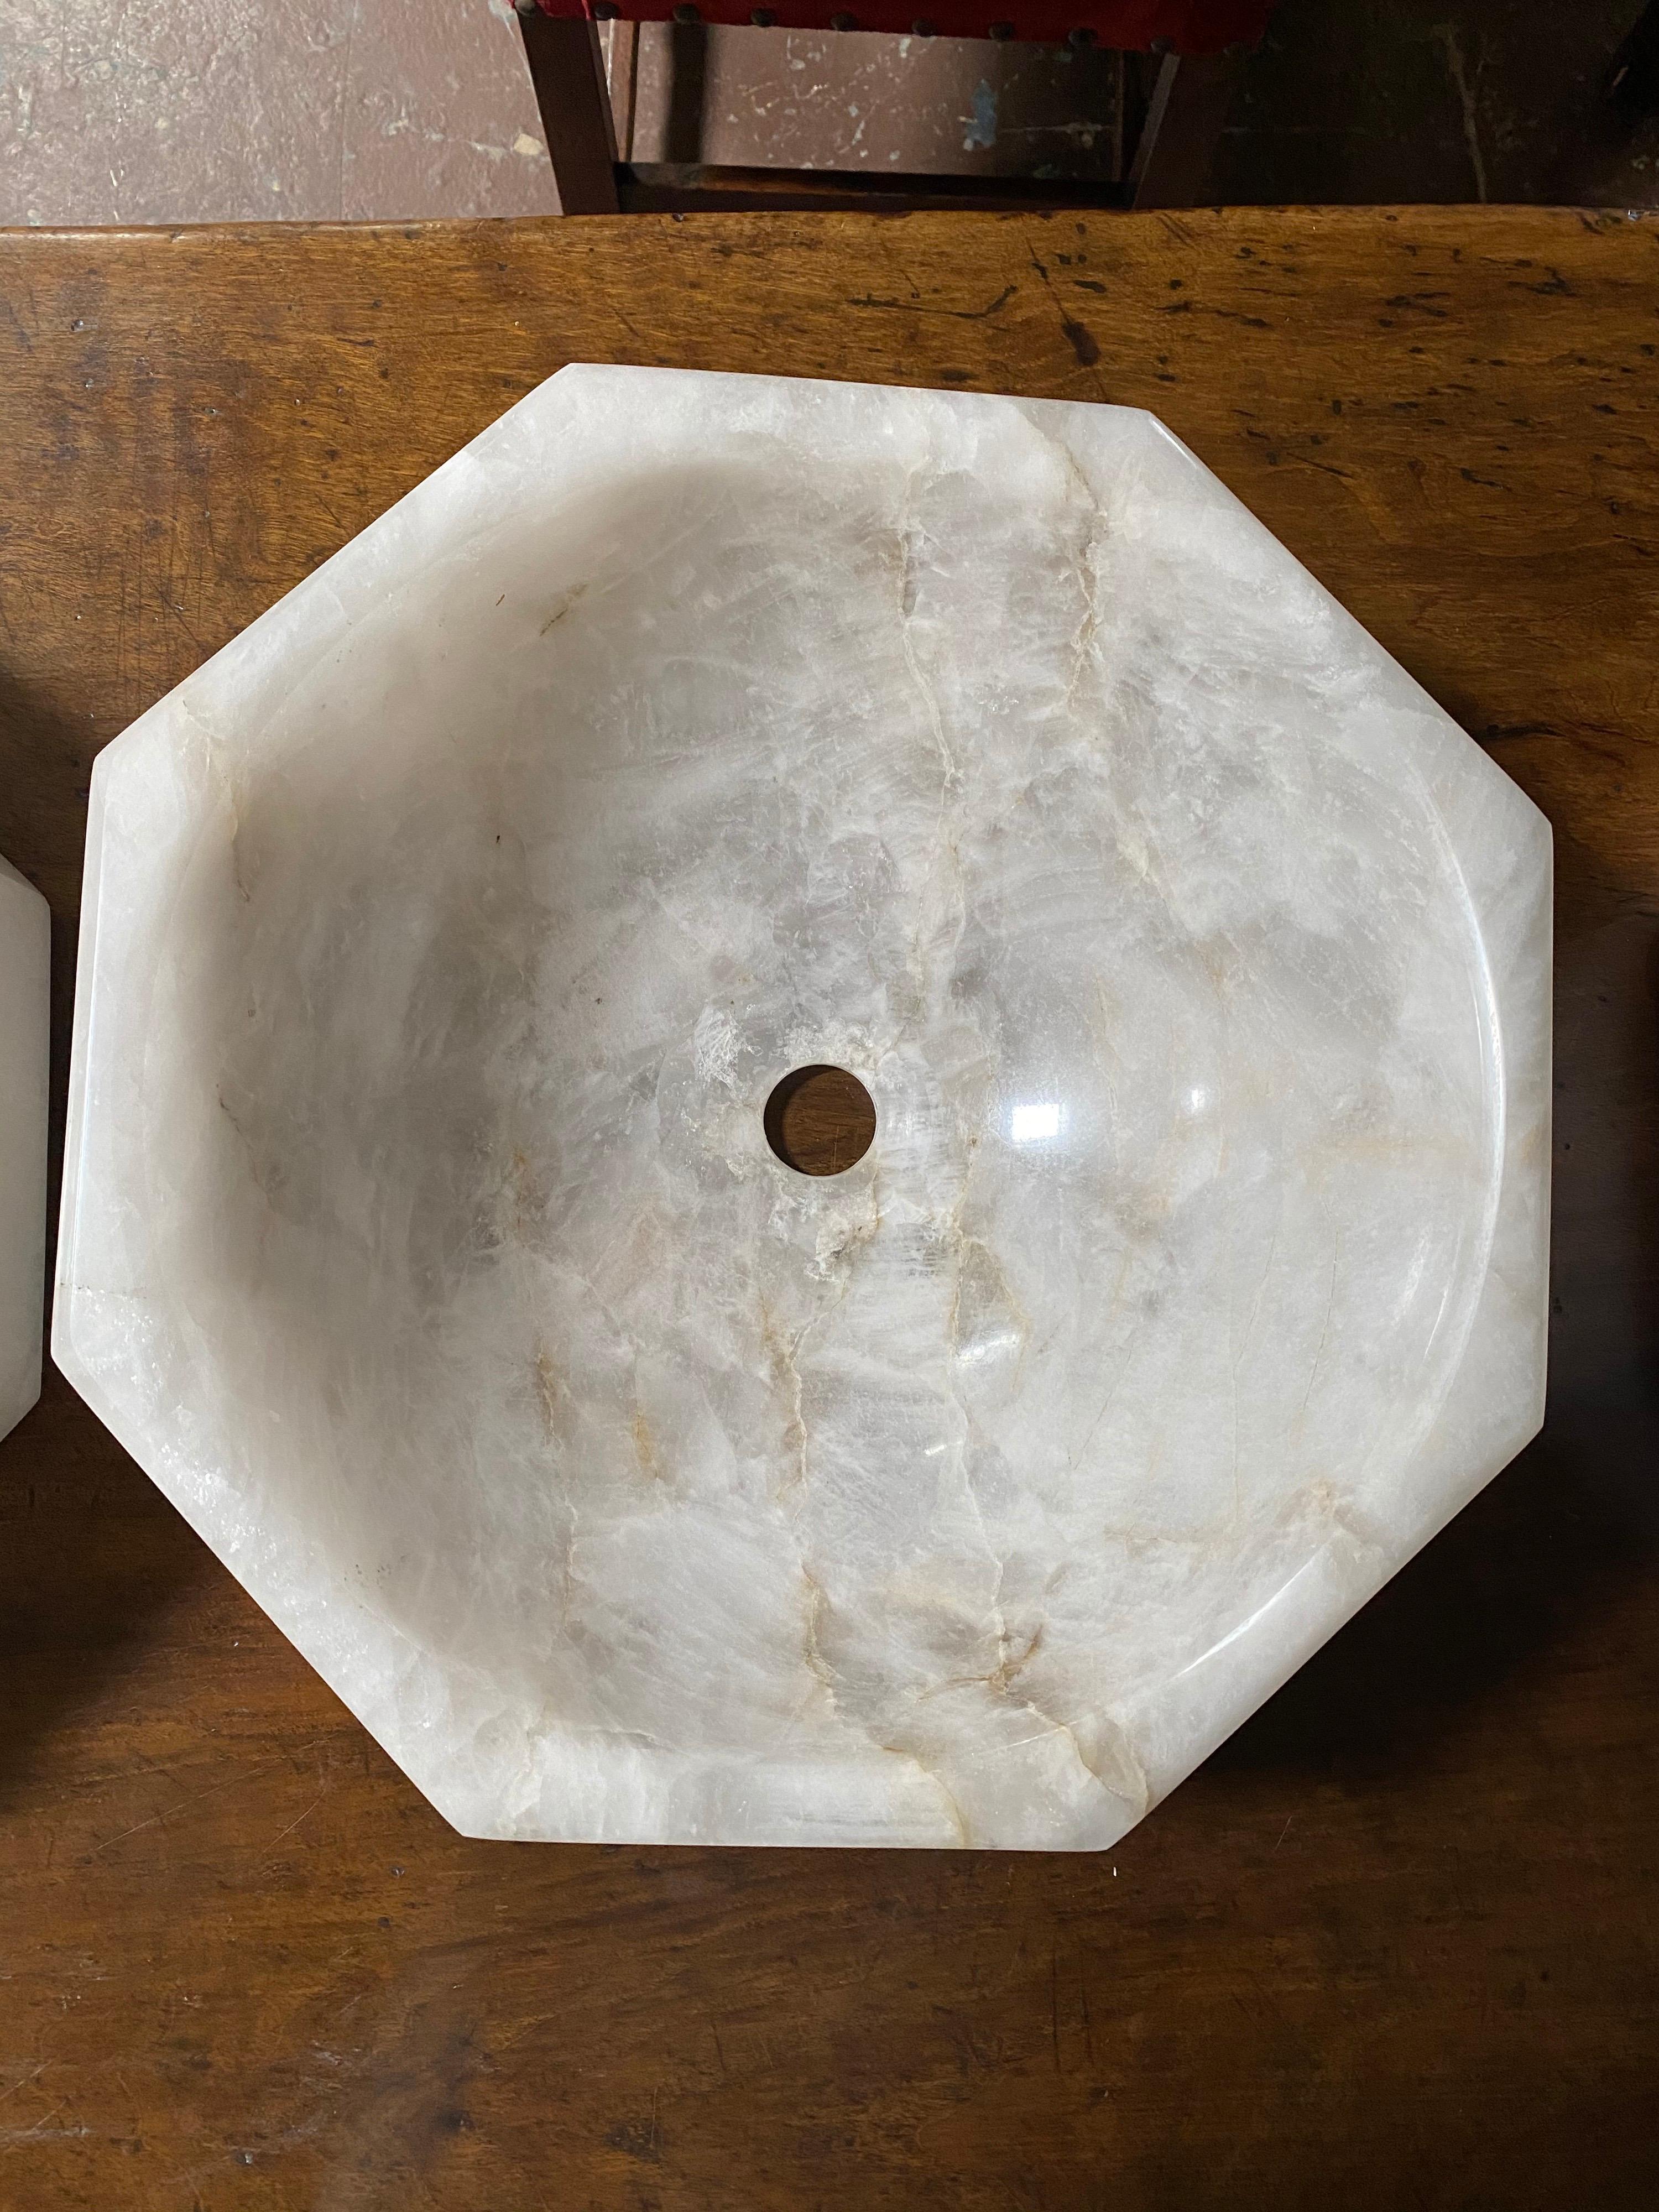 Hand carved rock crystal sink from Brazil.

If purchased we can drill and fit a drain for this item. However it will need to be sent to us.